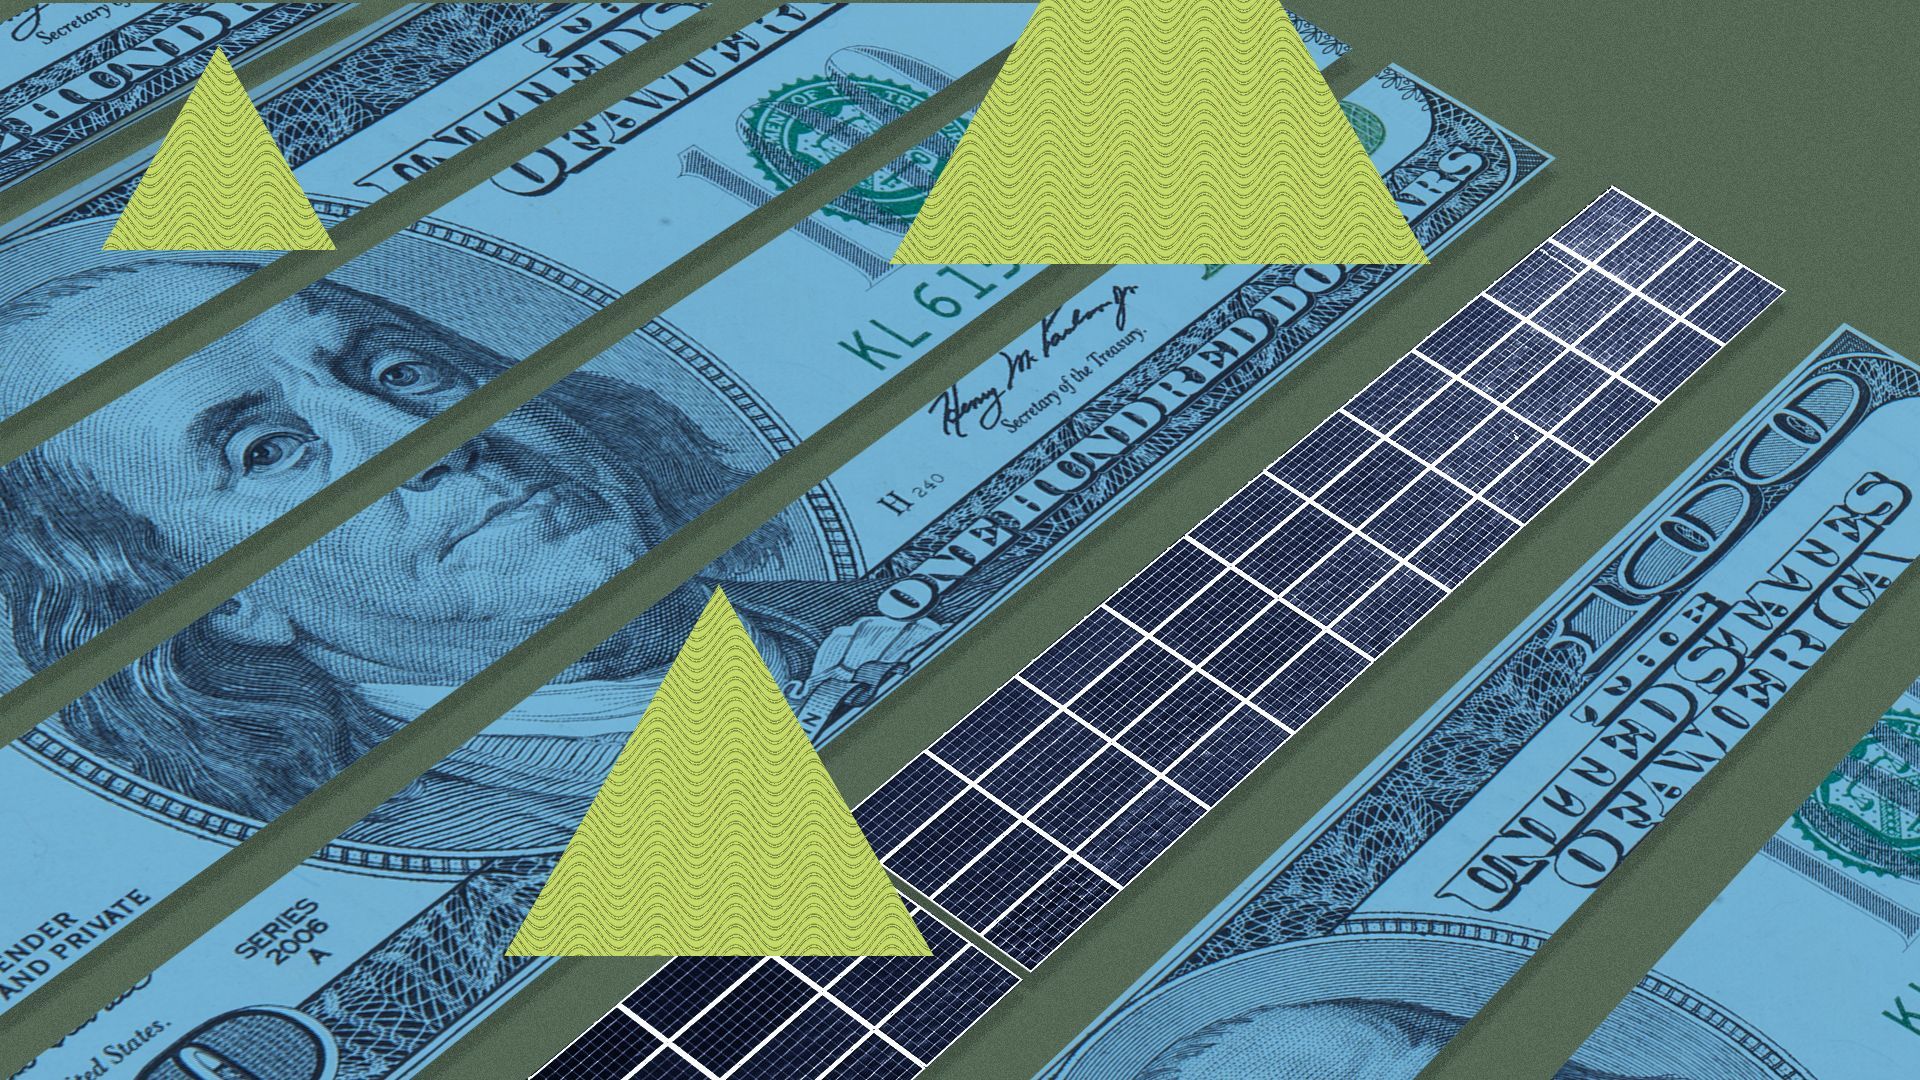 Illustration of rows of solar panels with abstract shapes and money elements.